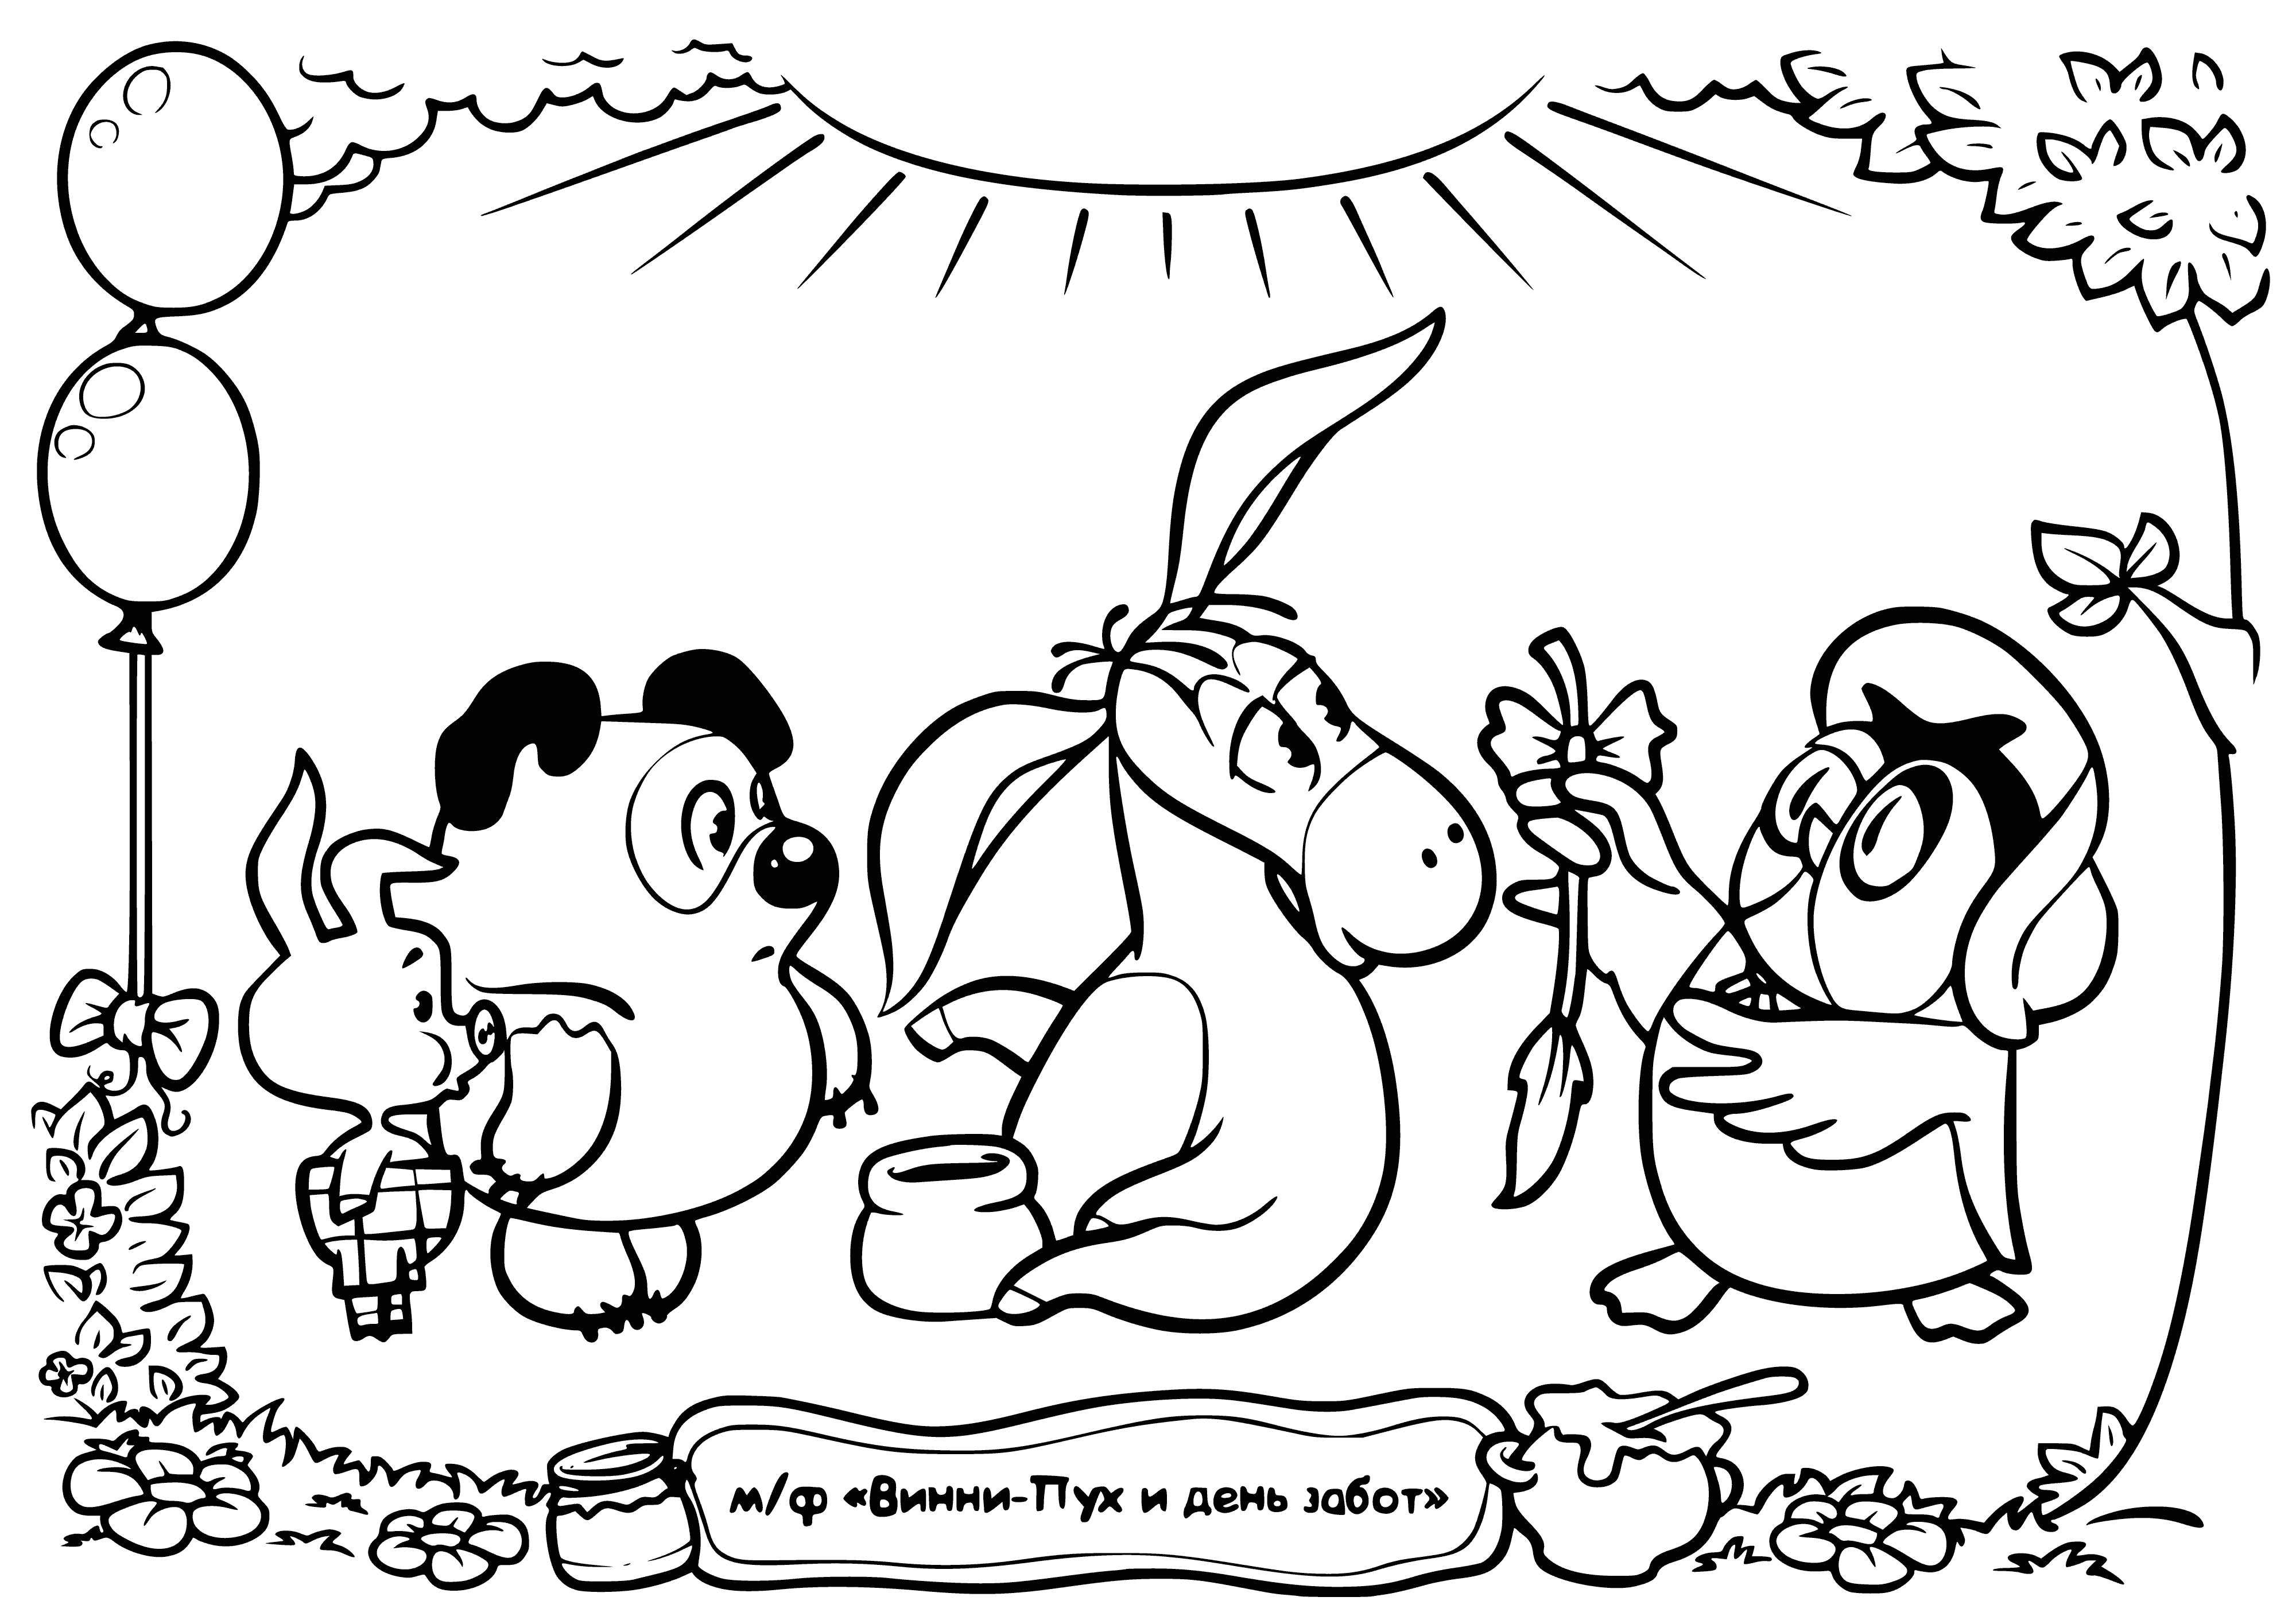 coloring page: Four Winnie the Pooh characters in a coloring page: Owl, Eeyore, Pooh, & Piglet. Owl stands on branch, Eeyore sits on ground, Pooh with honey pot, & Piglet peeking behind tree.